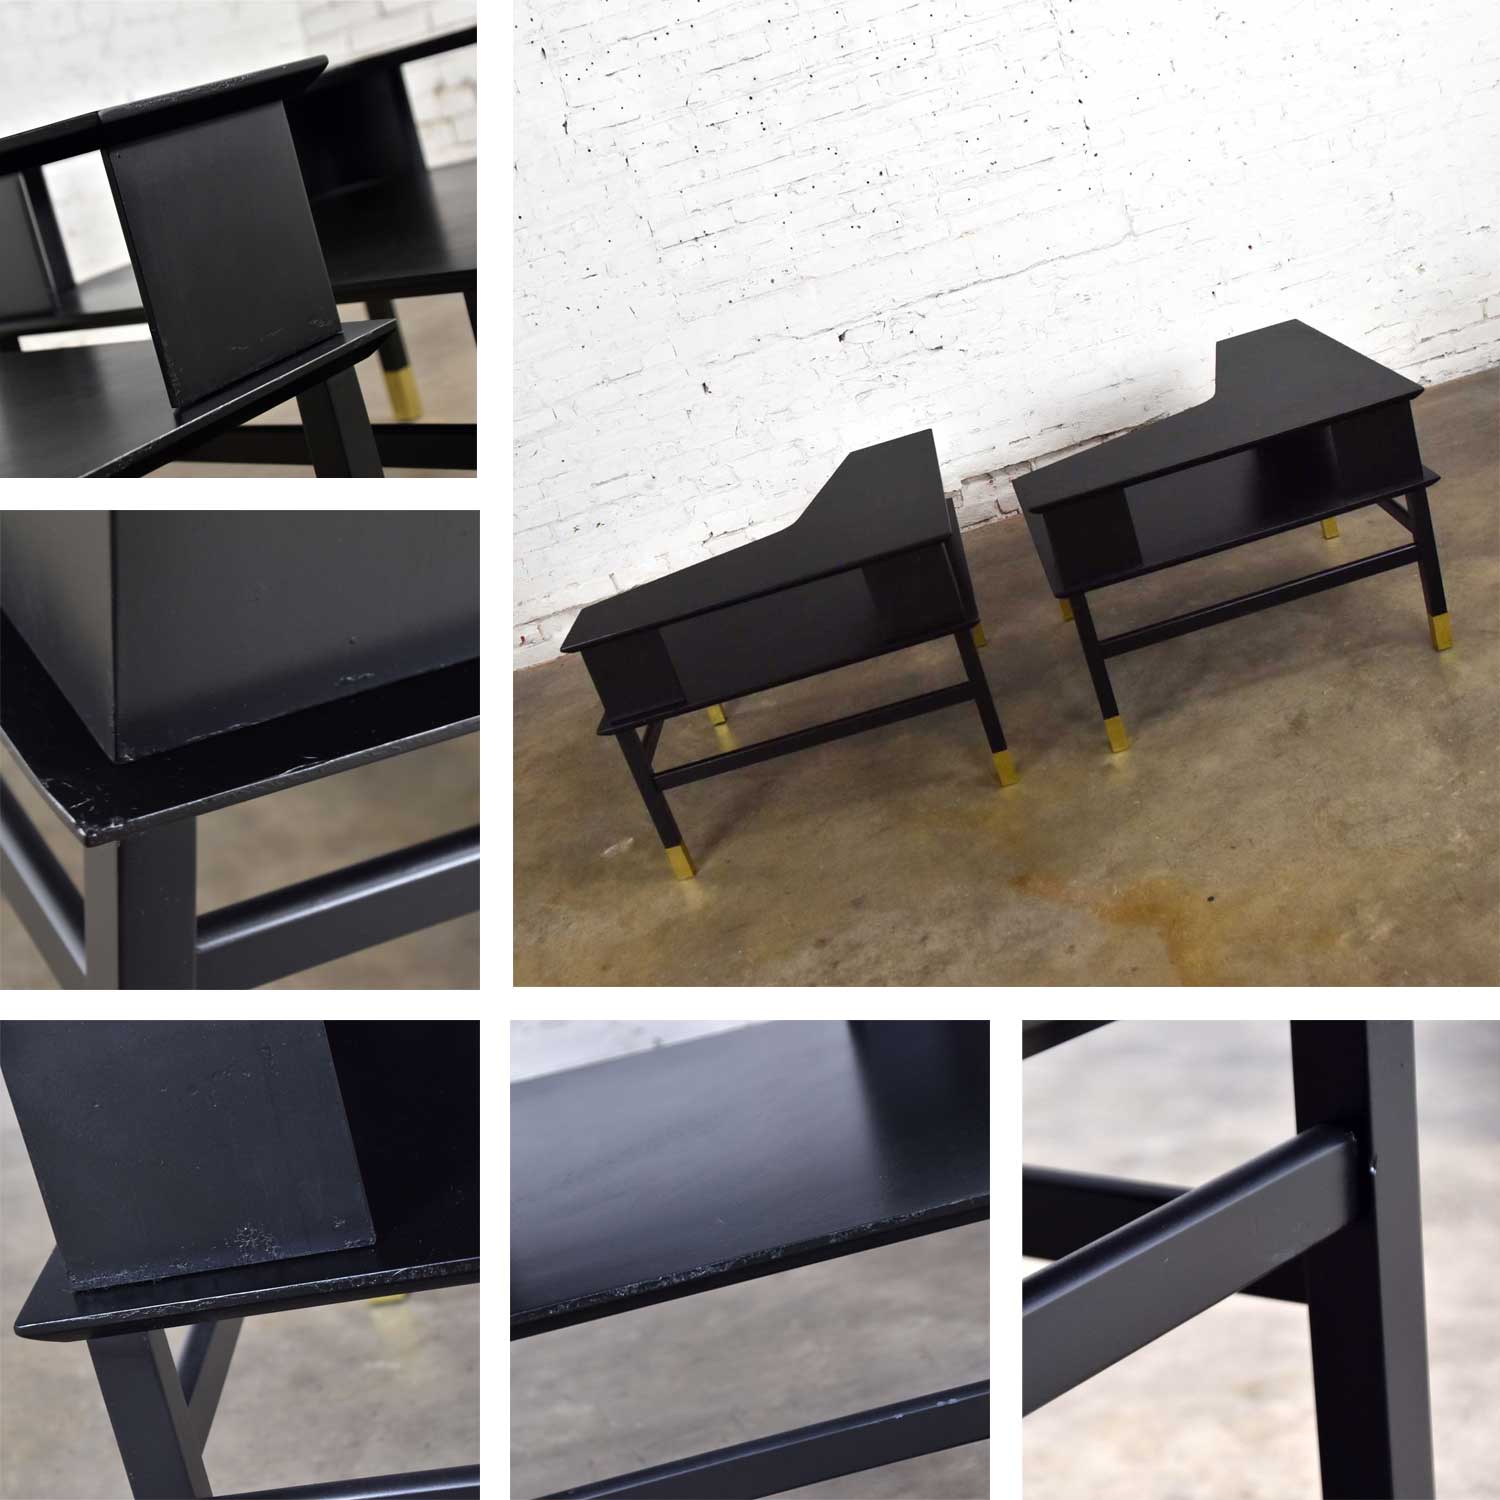 MCM Corner Step Tables a Pair Black with Brass Sabots from Coronado Group by Luther Draper for Founders Furniture